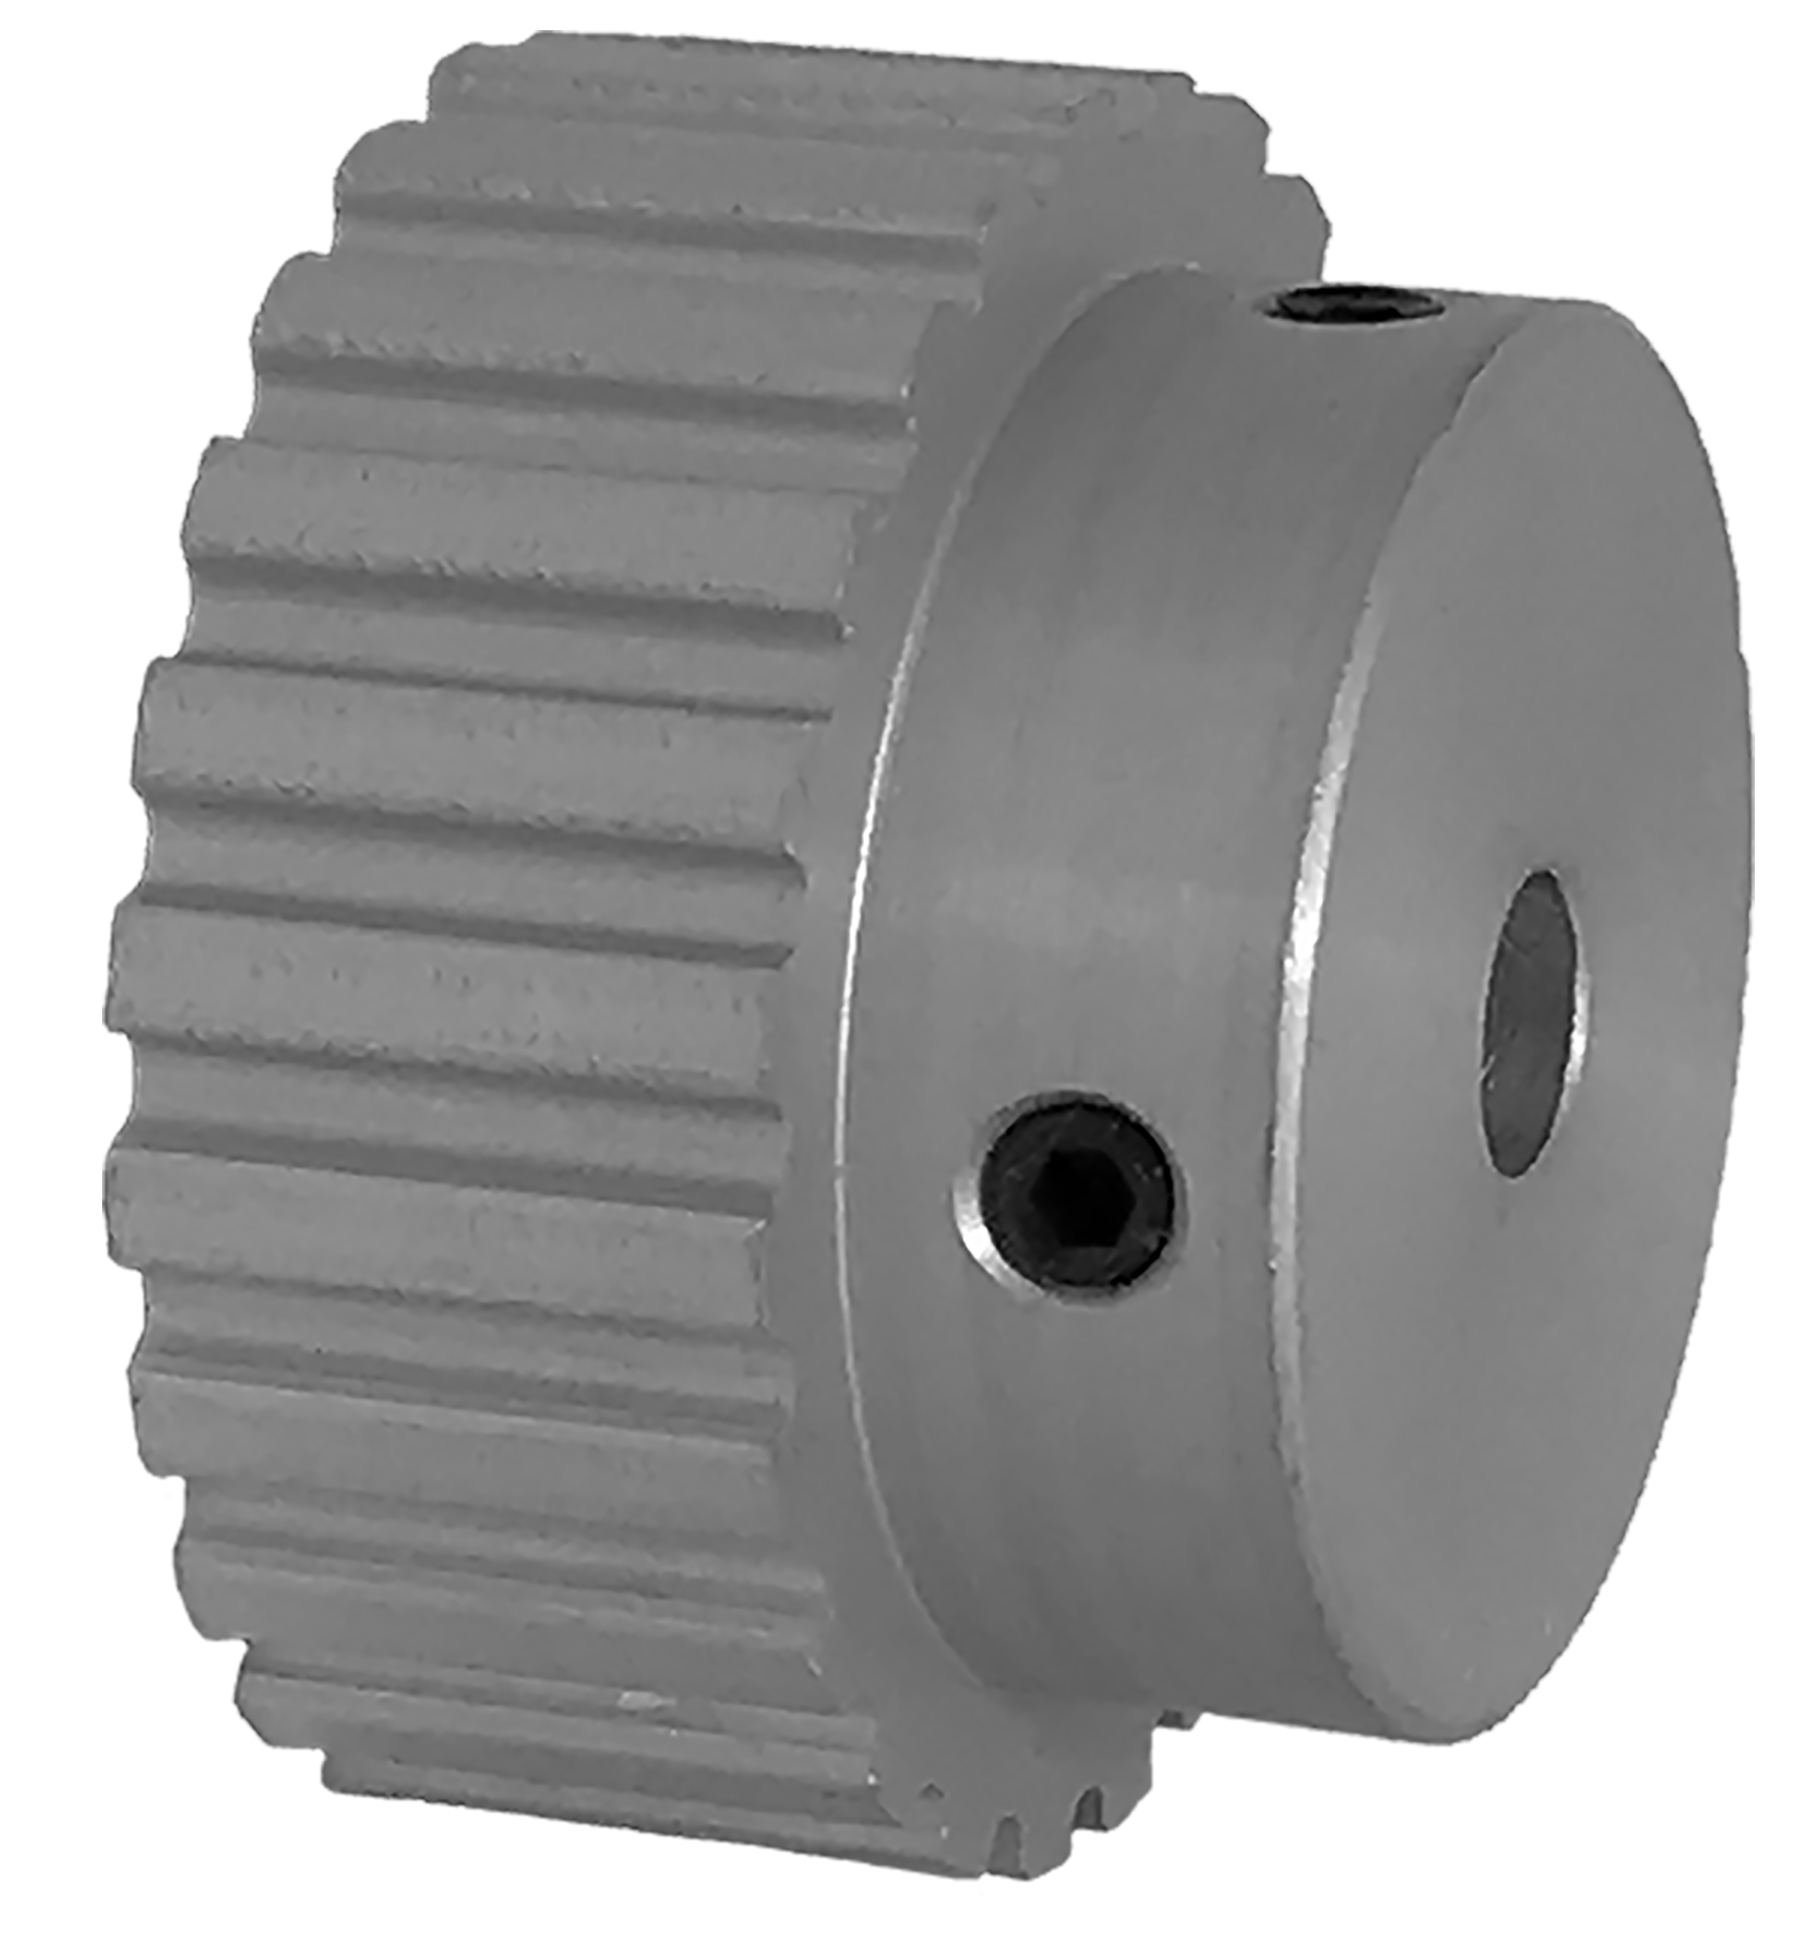 24XL037-6A3 - Aluminum Imperial Pitch Pulleys